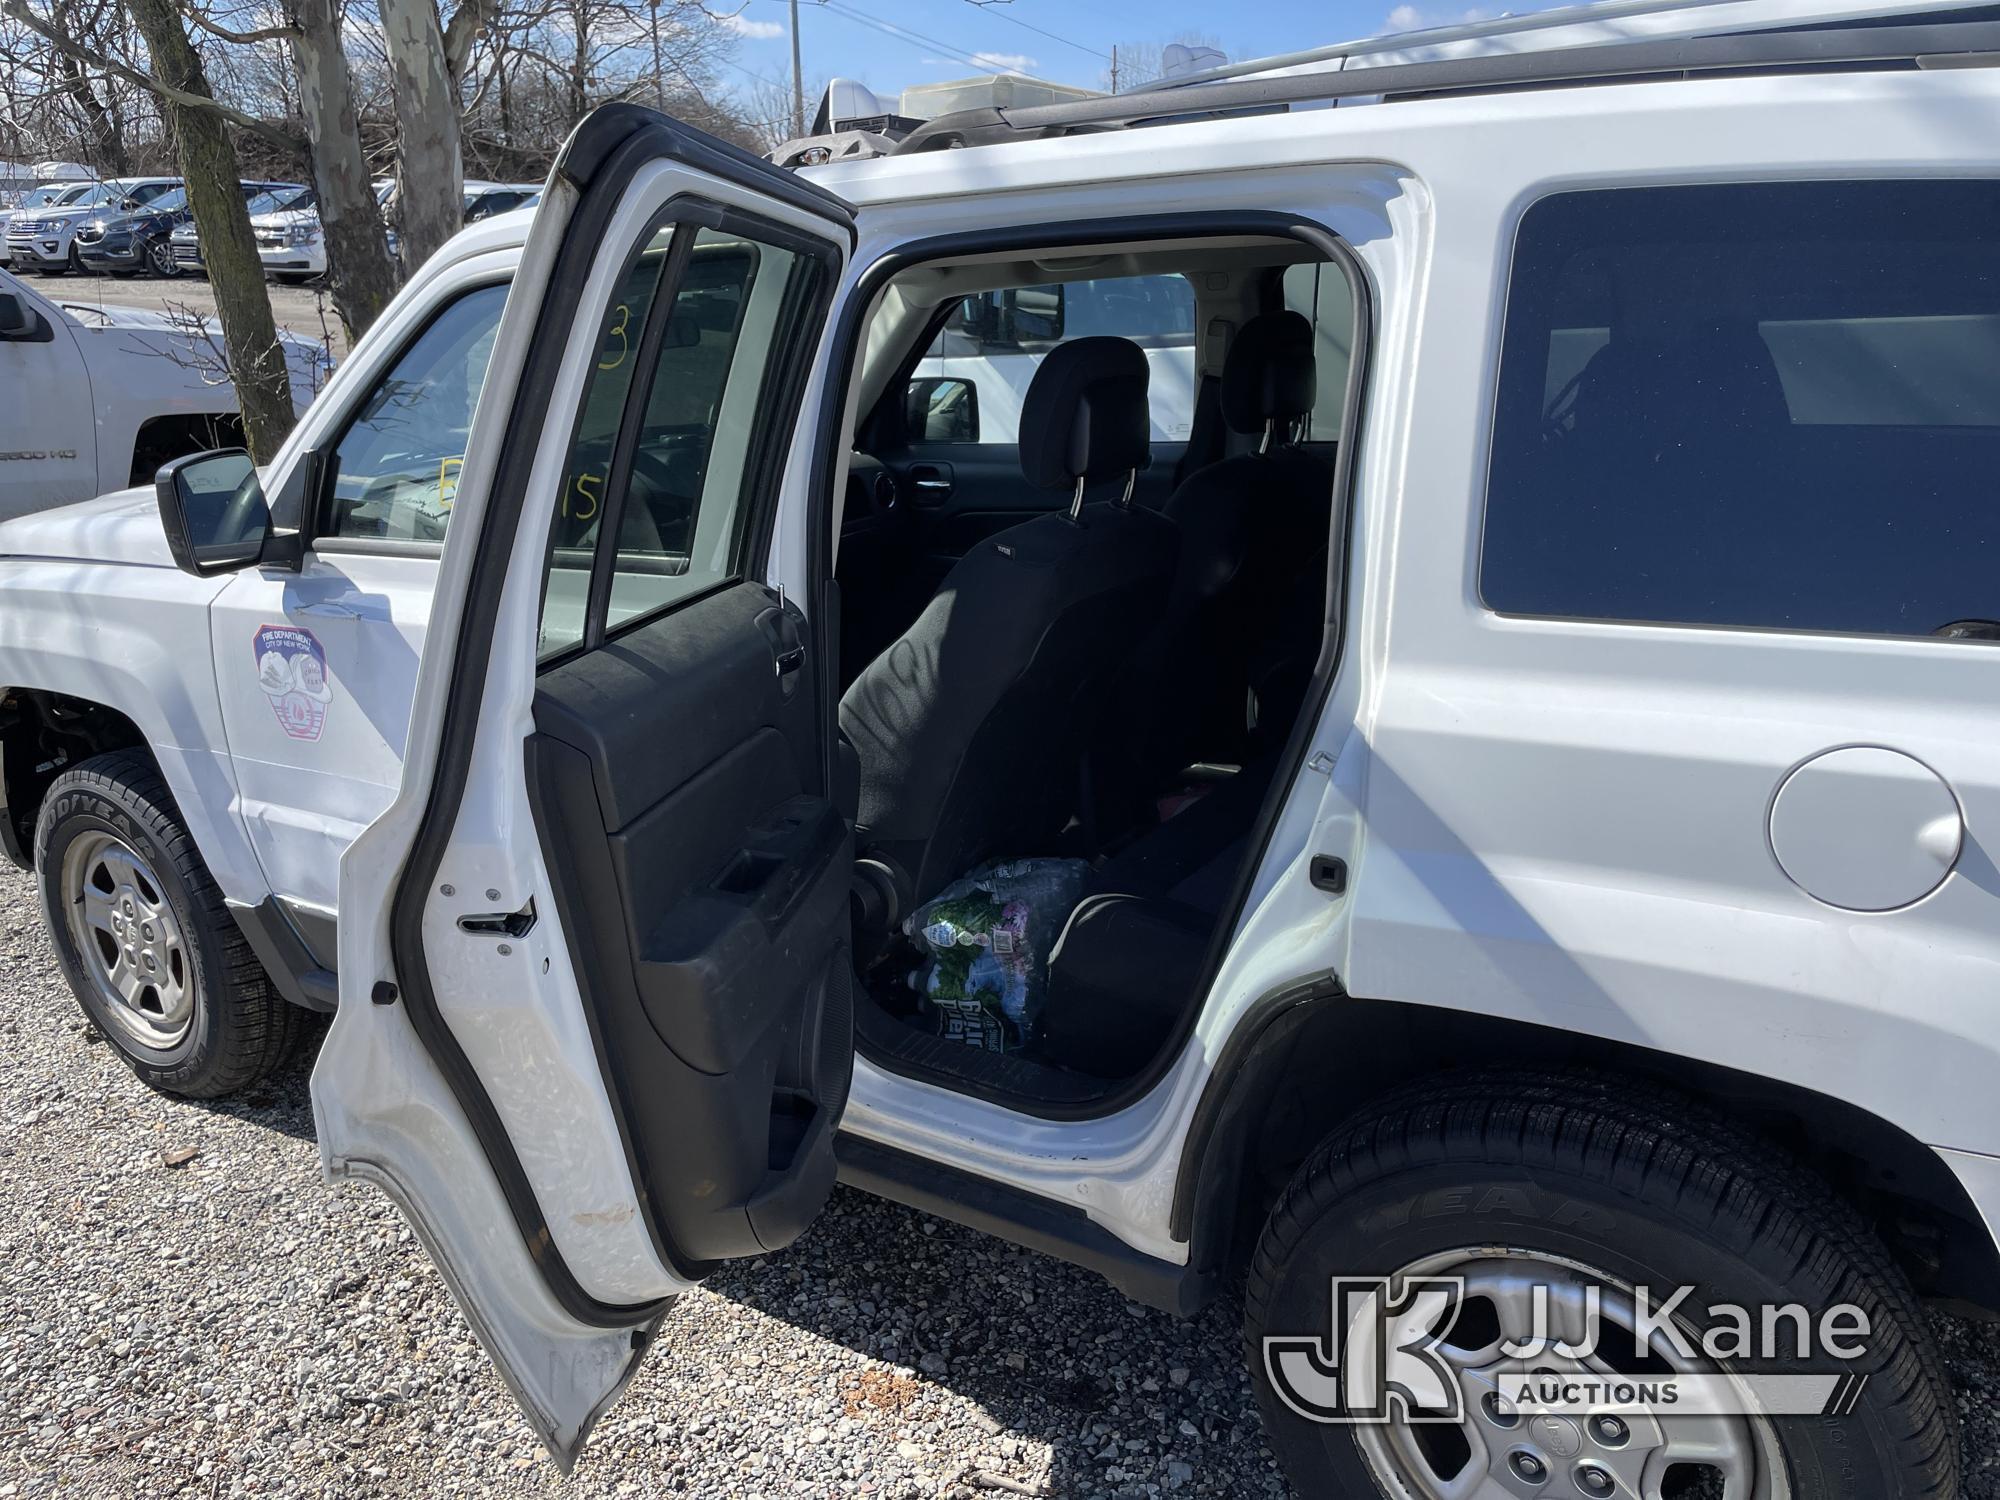 (Plymouth Meeting, PA) 2014 Jeep Patriot 4x4 4-Door Sport Utility Vehicle Not Running, Condition Unk